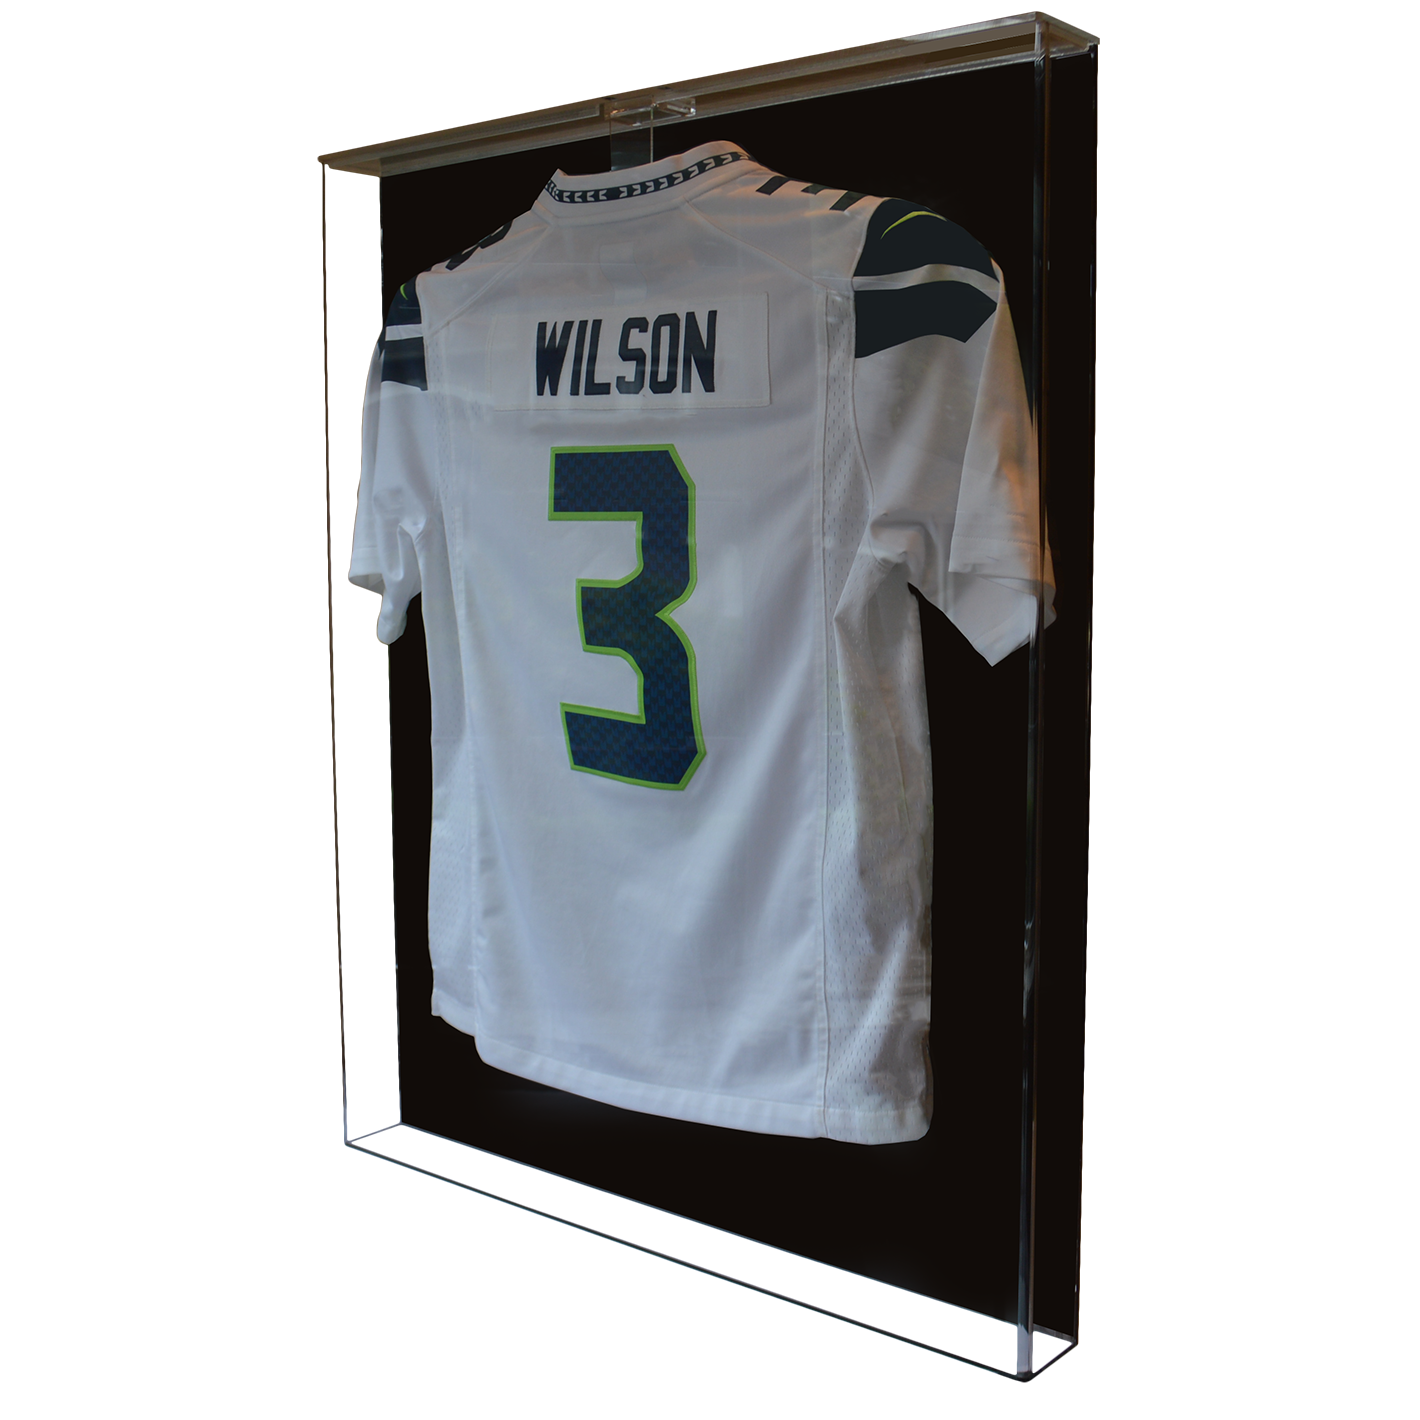 jersey display case